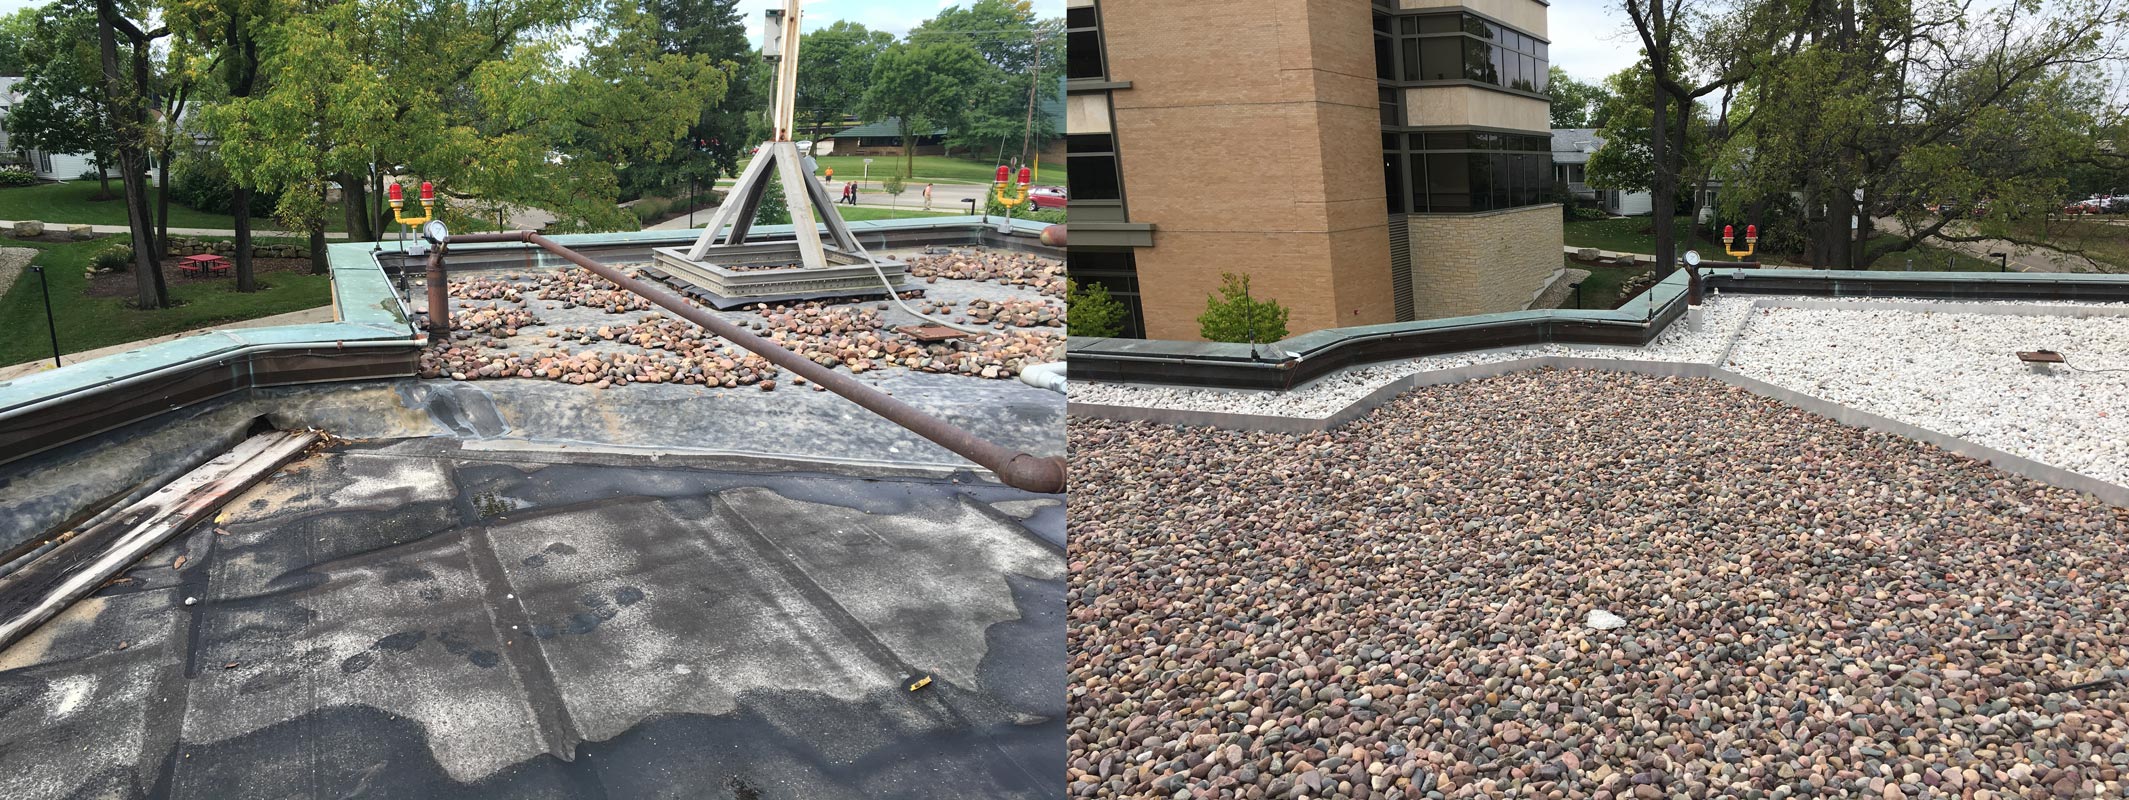 university-roof-replacement-1